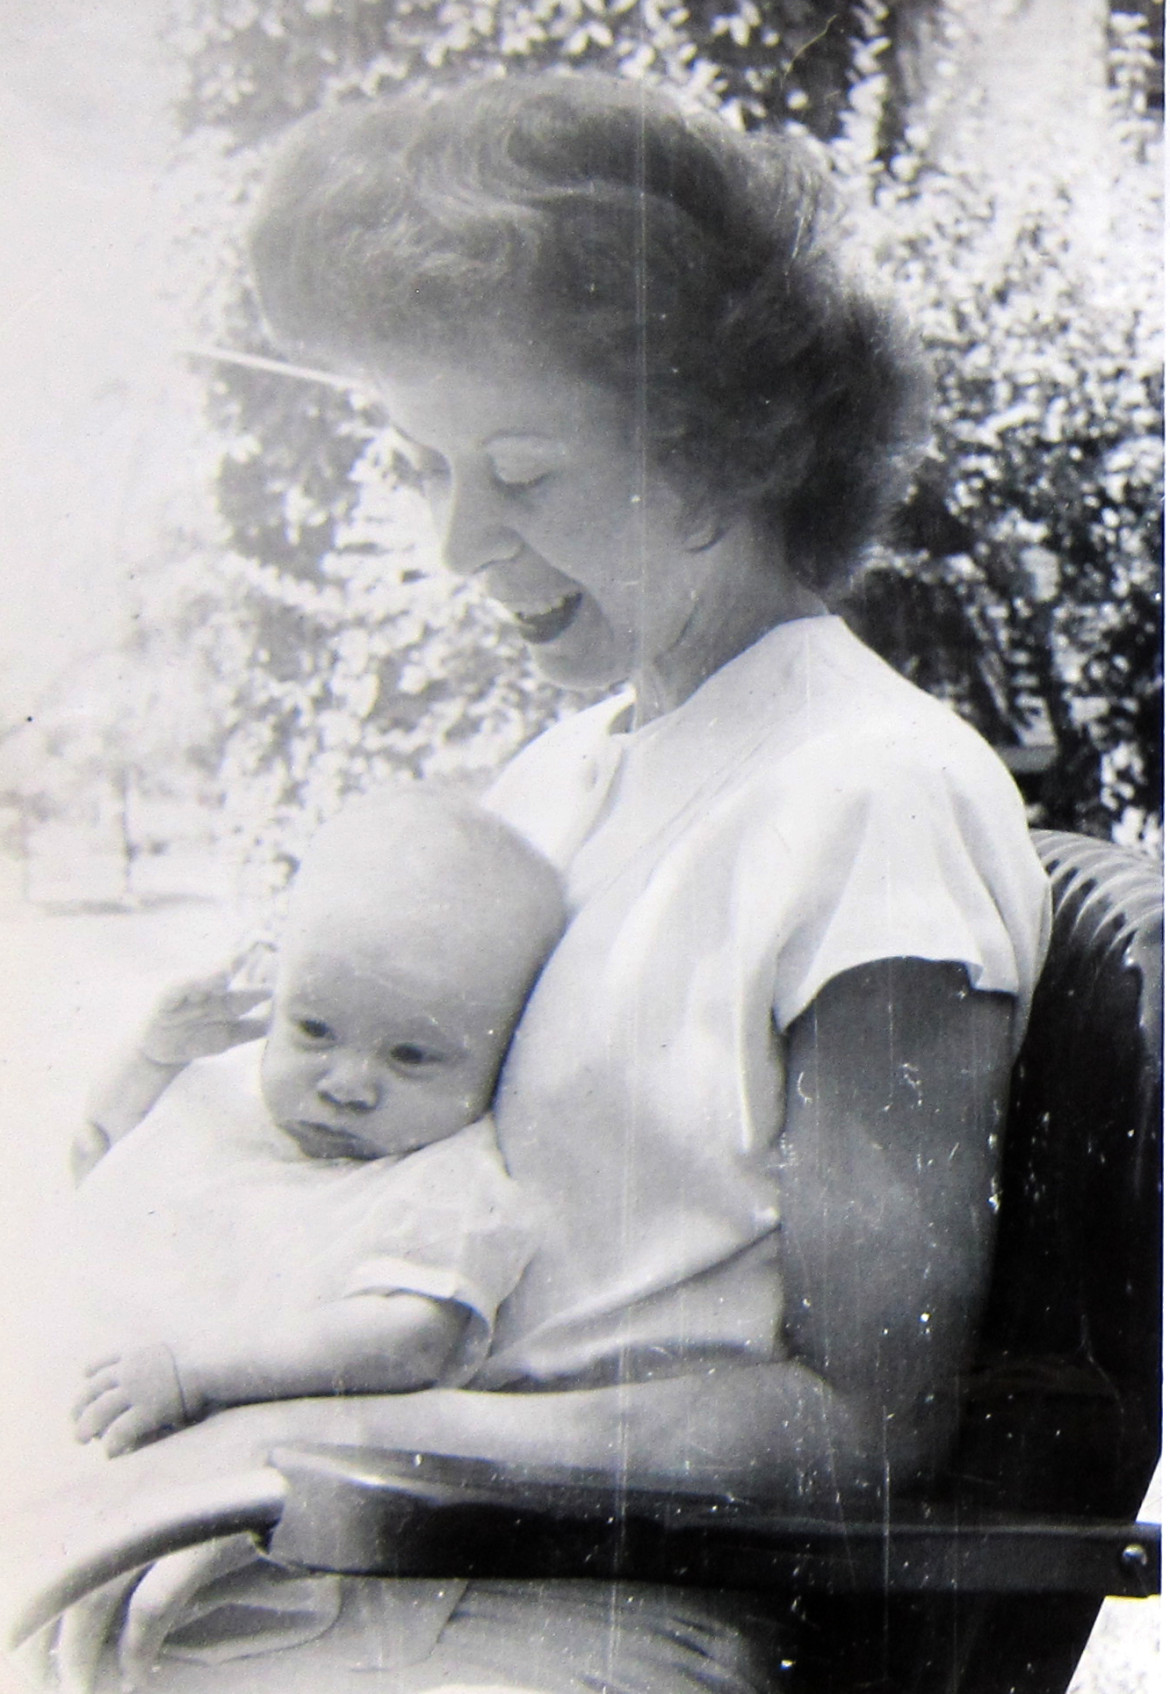 Marjorie and her baby.  From conversations I had with Matt Irwin, I believe her child was a little girl.